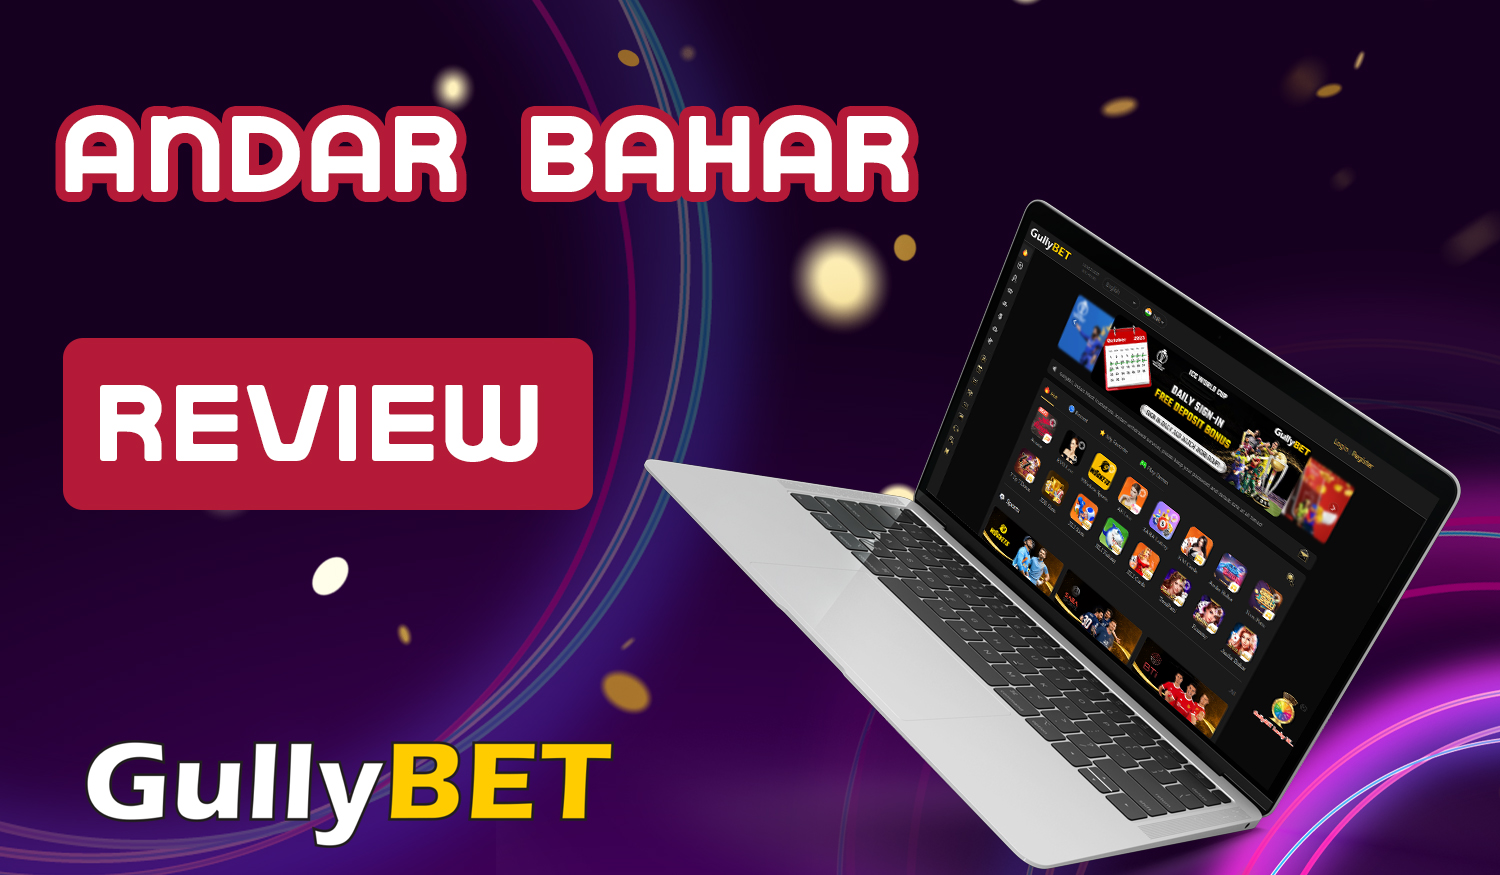 Review of Gullybet online casino and Andar Bahar games